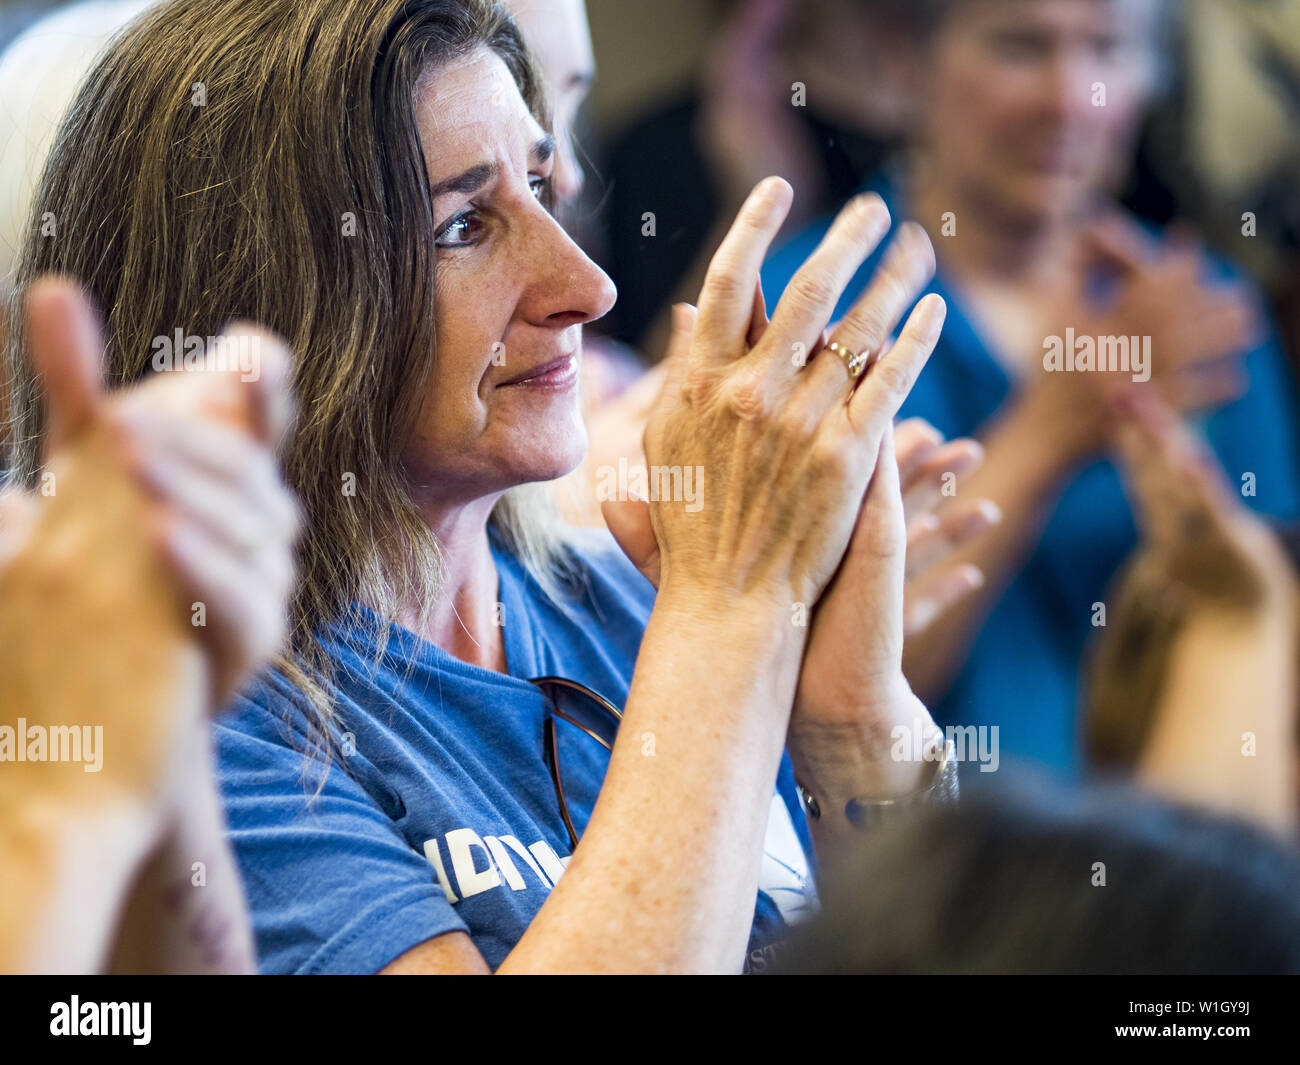 July 2, 2019 - Des Moines, Iowa, U.S - People applaud at the end of a protest in Rep. Cindy Axne's office. About 150 people came to Congresswoman Axne's office in Des Moines Tuesday to protest the treatment of migrant children detained by the US Border Patrol along the US/Mexico border. Axne was not in the office, but a member of Axne's staff took notes and promised to pass people's concerns on to the Congresswoman. Similar protests were held at other congressional offices and Immigration and Customs Enforcement (ICE) detention facilities across the country. (Credit Image: © Jack Kurtz/ZUMA Wi Stock Photo